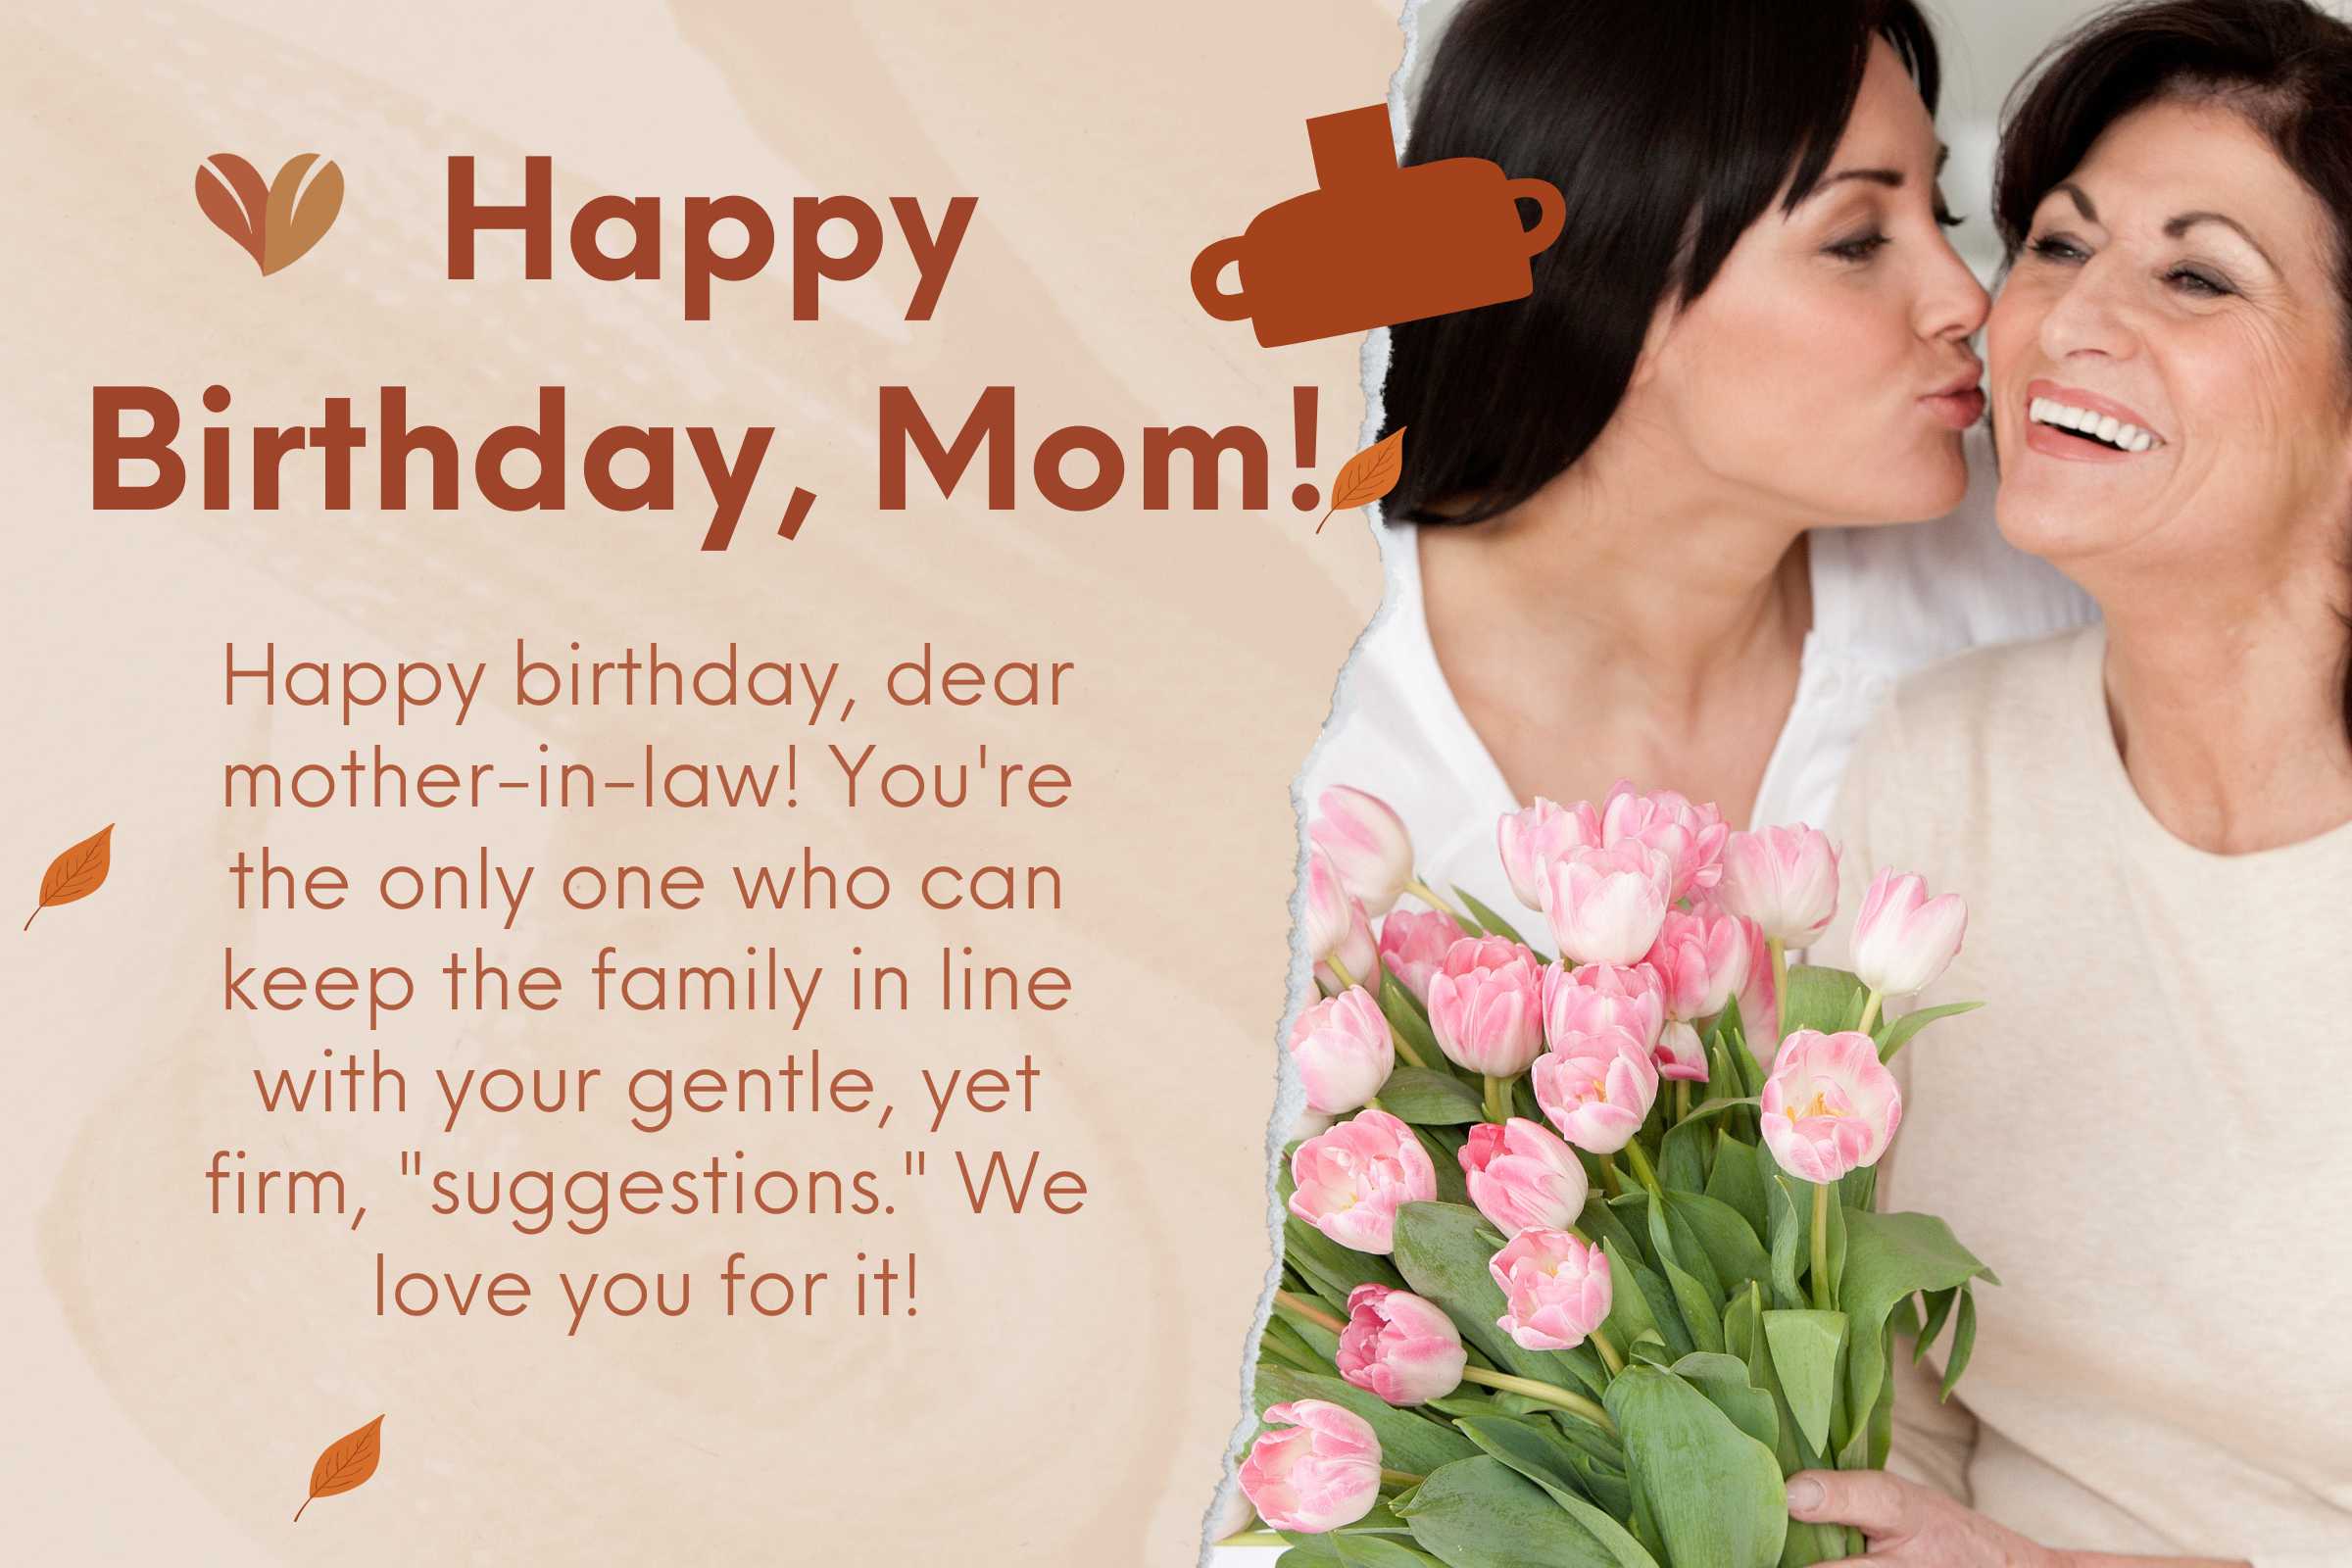 Sending you birthday quotes for mother-in-law wrapped with lots of love